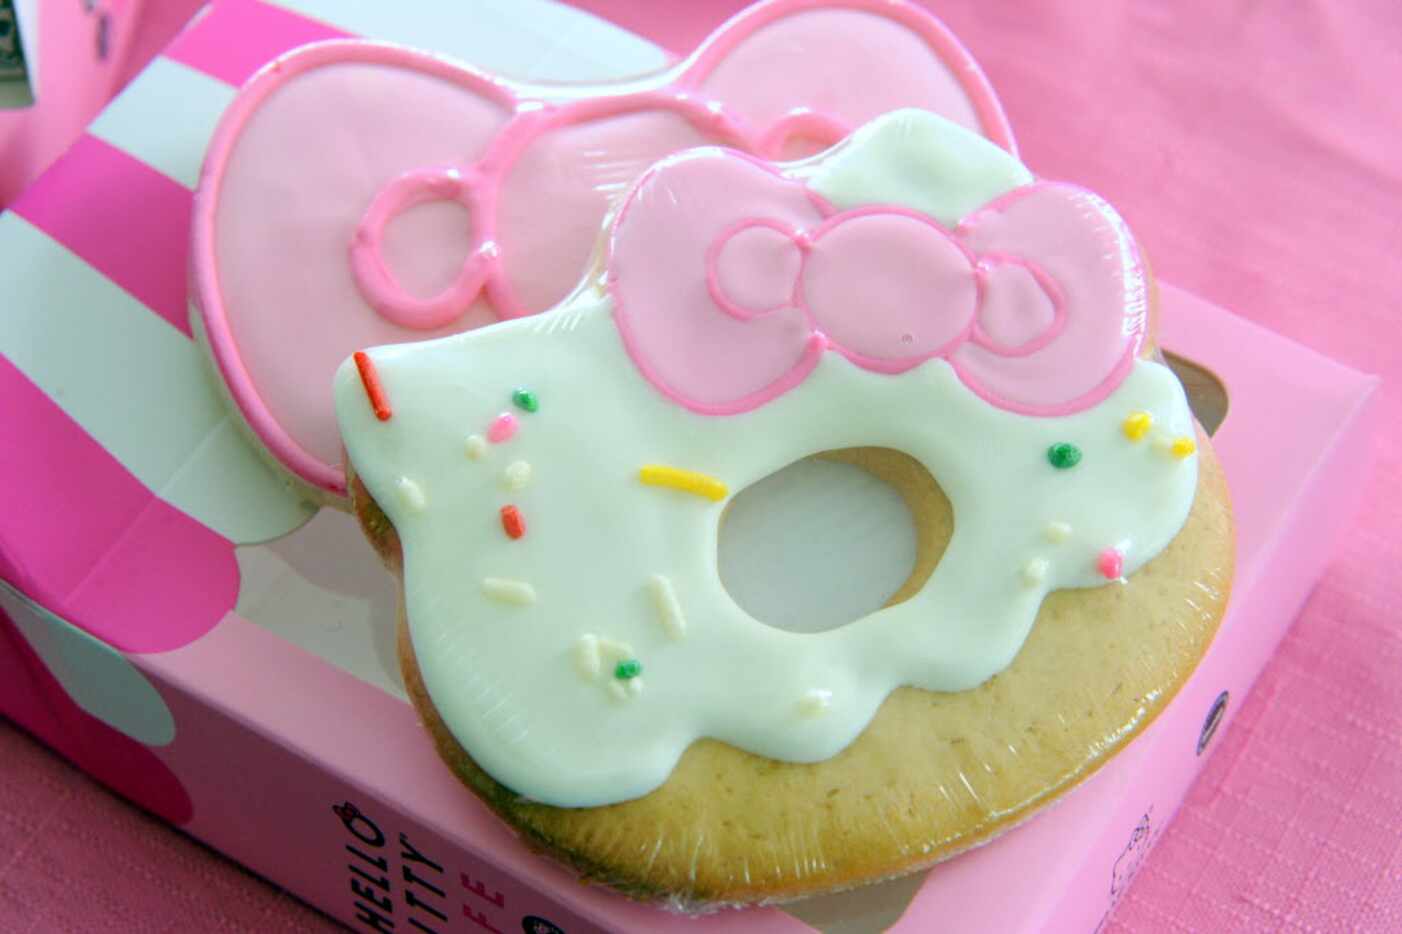 Fans can purchase a box of three iced cookies at the Hello Kitty Cafe Truck at The Shops at...